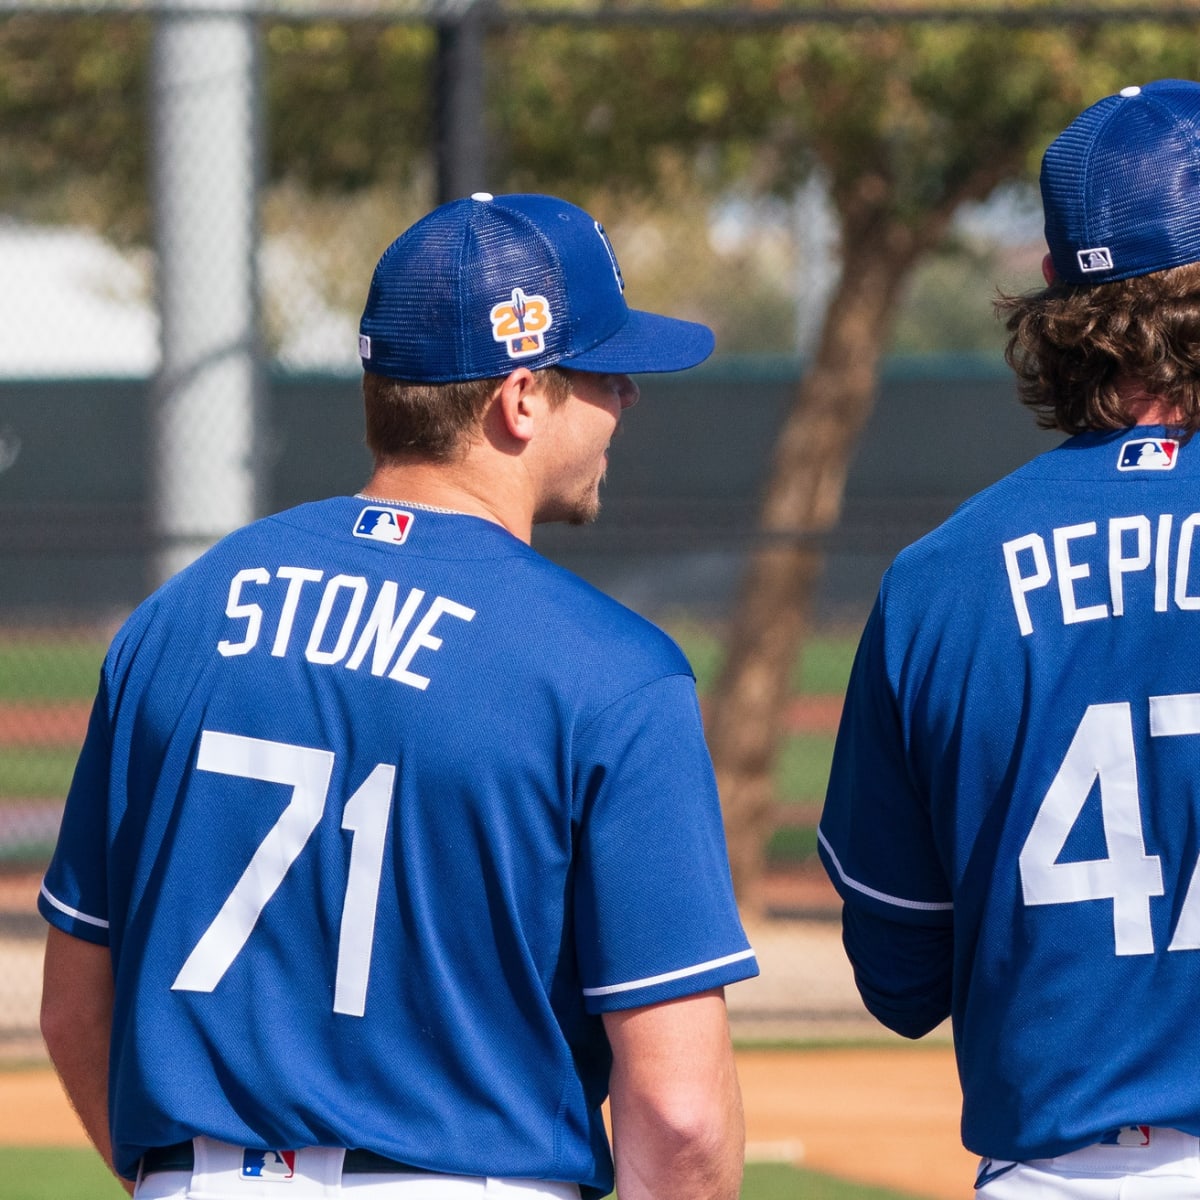 Dodgers prospect Gavin Stone making an impact in first MLB camp